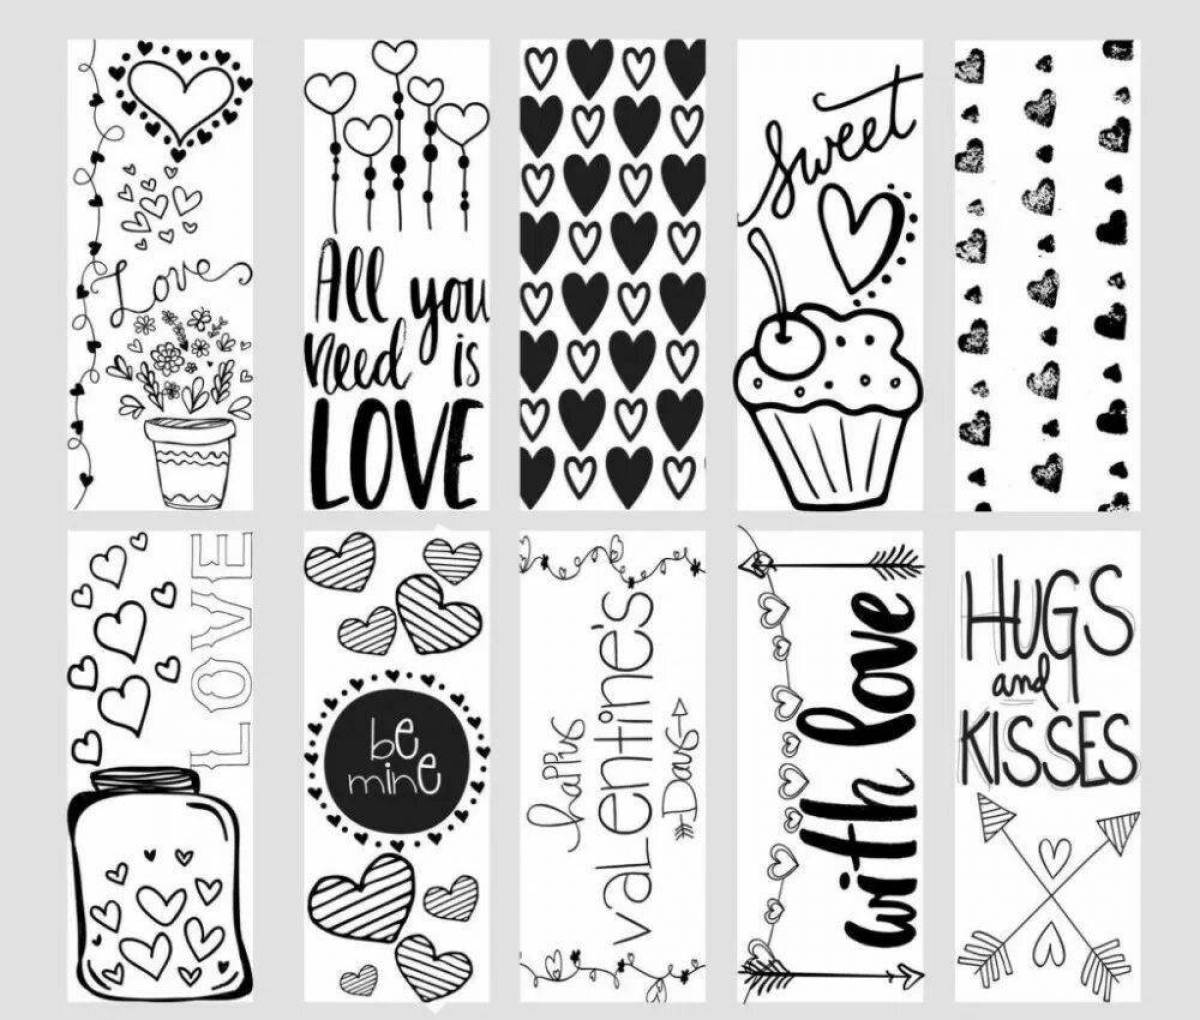 Personal diary stickers #1